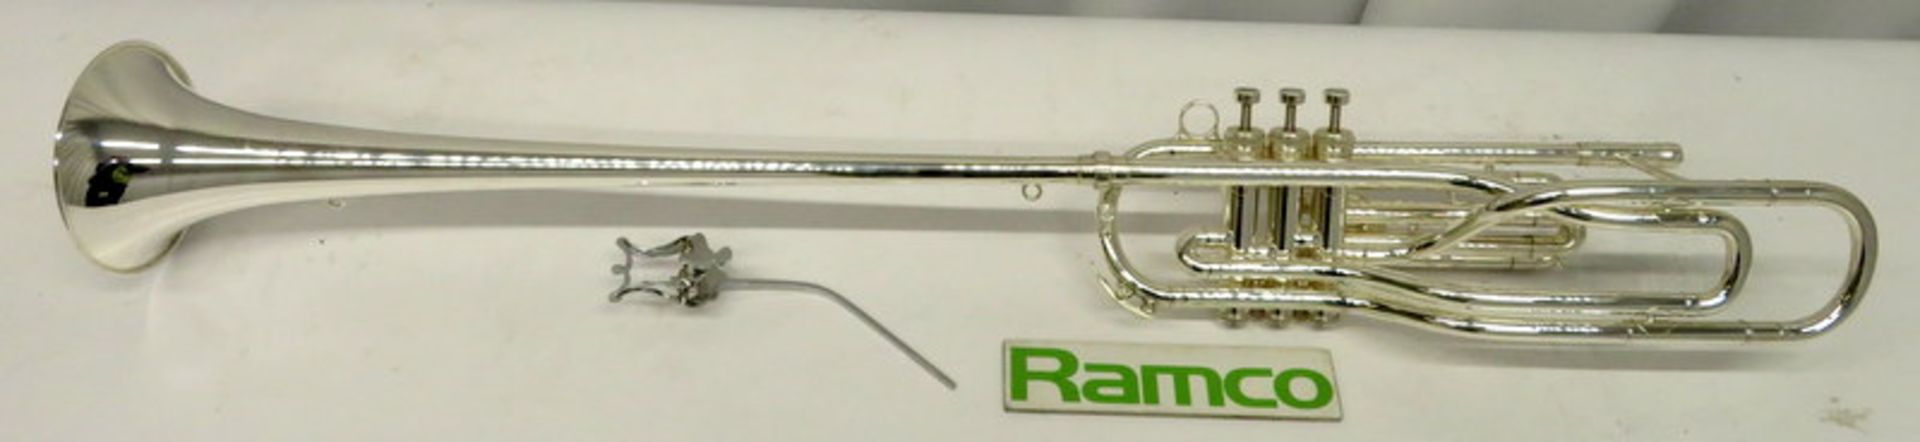 Besson International BE707 Fanfare Trumpet With Case. Serial Number: 883173. Please Note T - Image 3 of 16